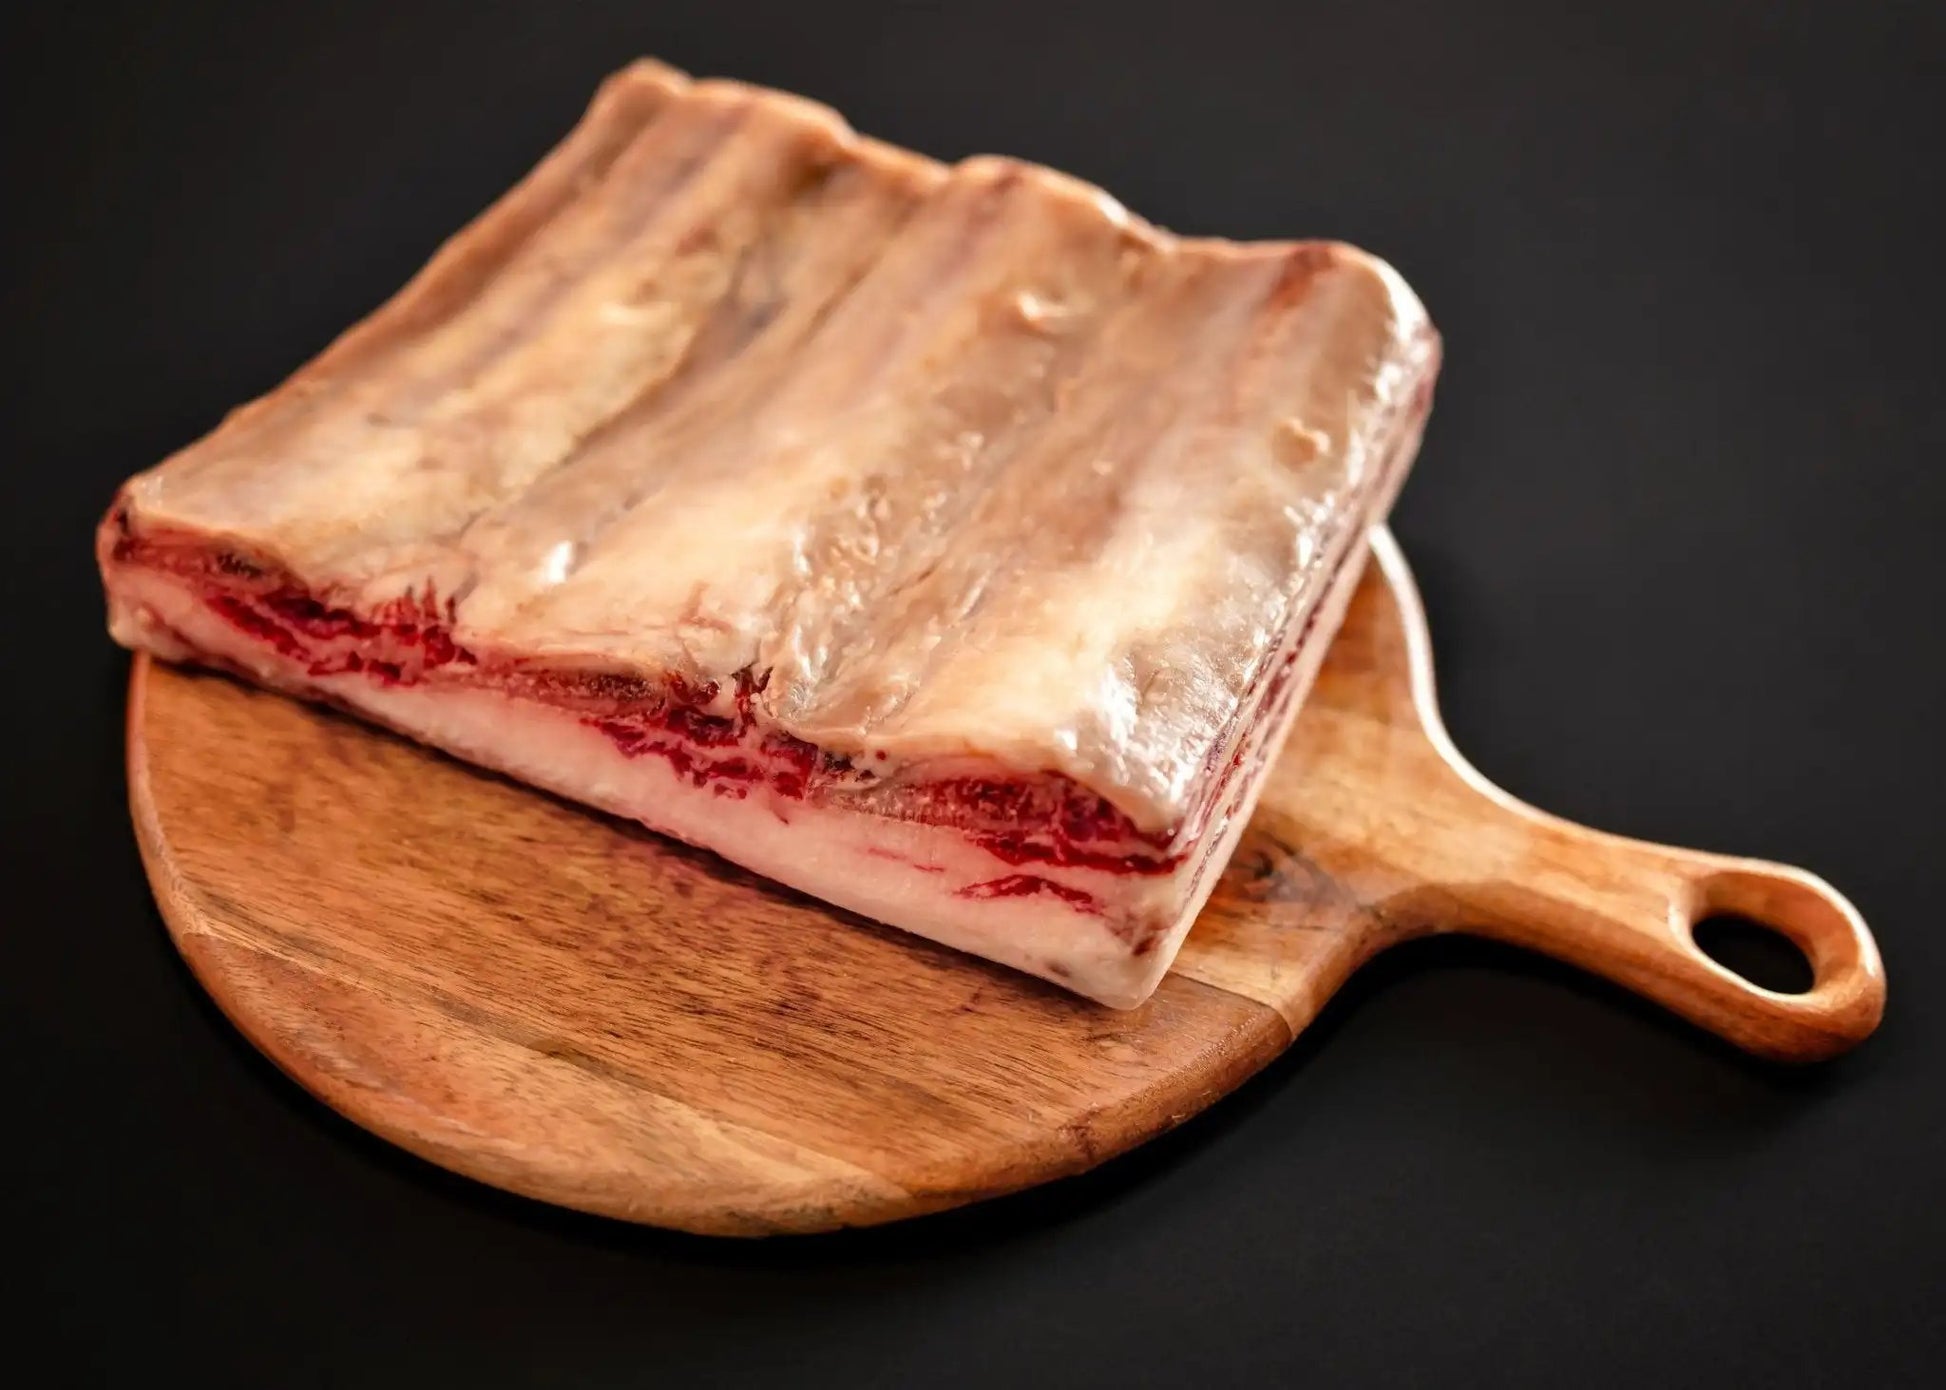 100% All-Natural Grass-Fed Pasture-Raised Wagyu Short Rib Plate - The Hufeisen-Ranch (WYO Wagyu)